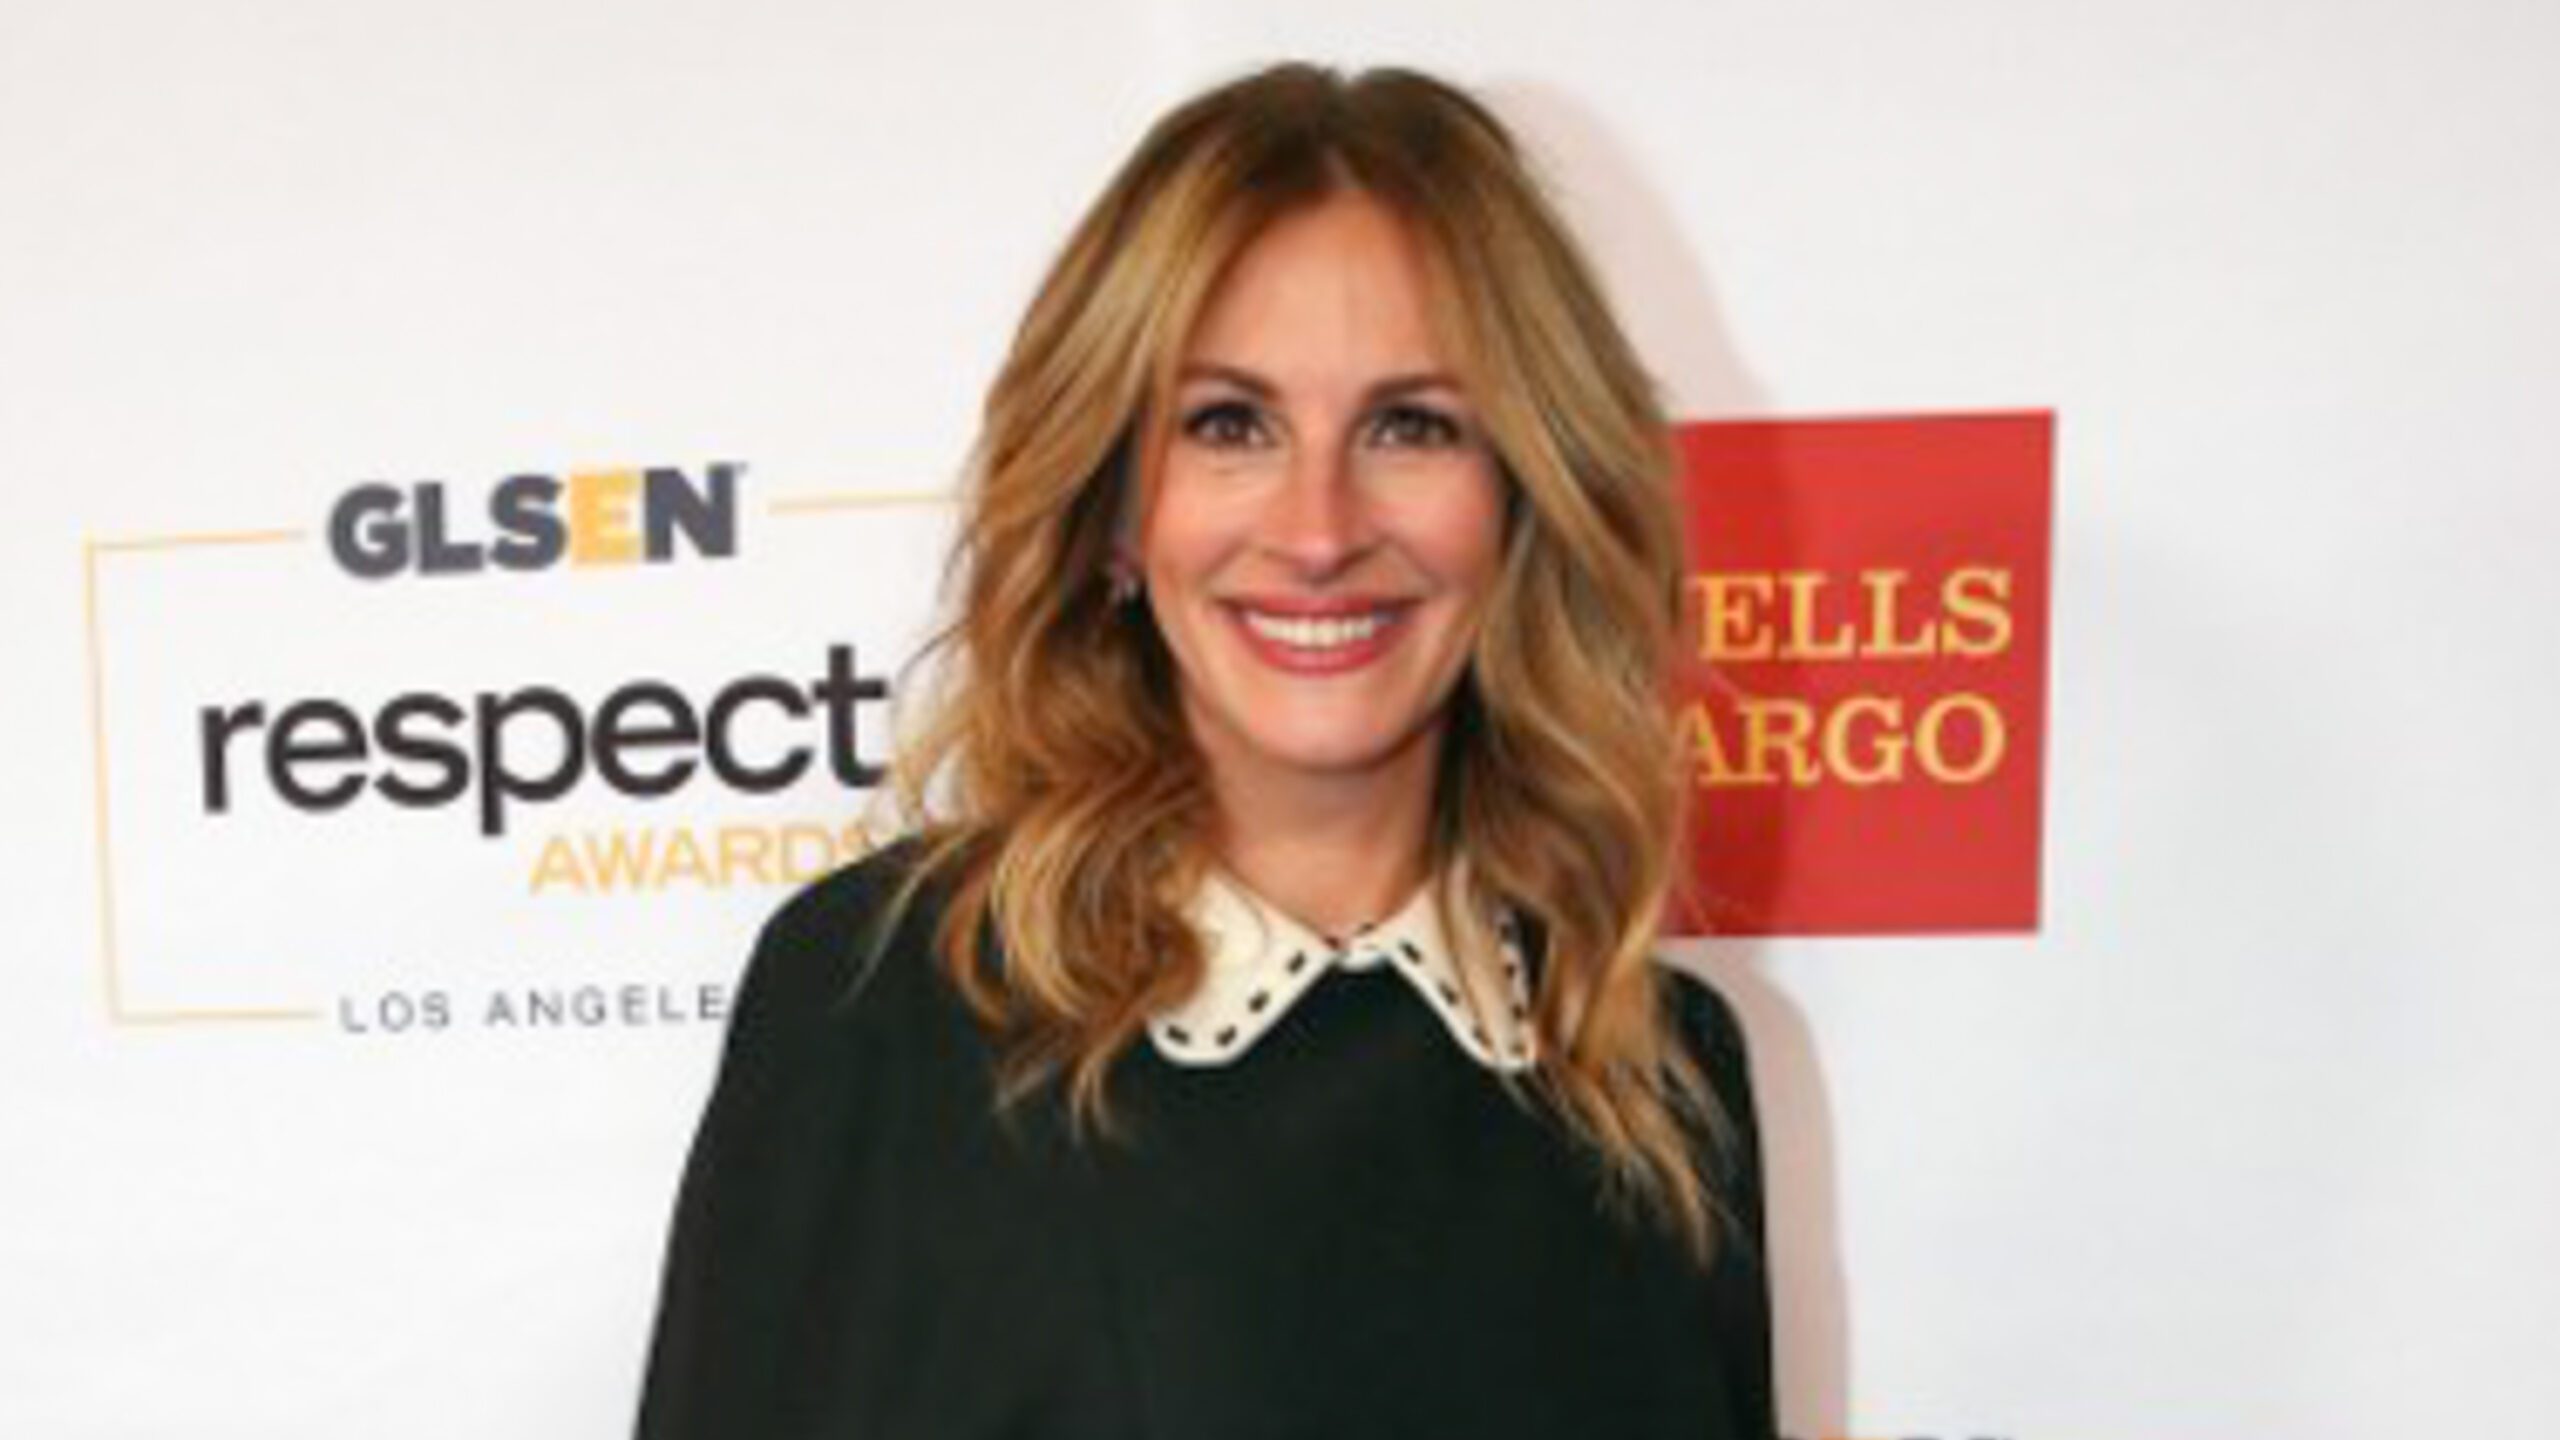 Julia Roberts set to star in her first TV show